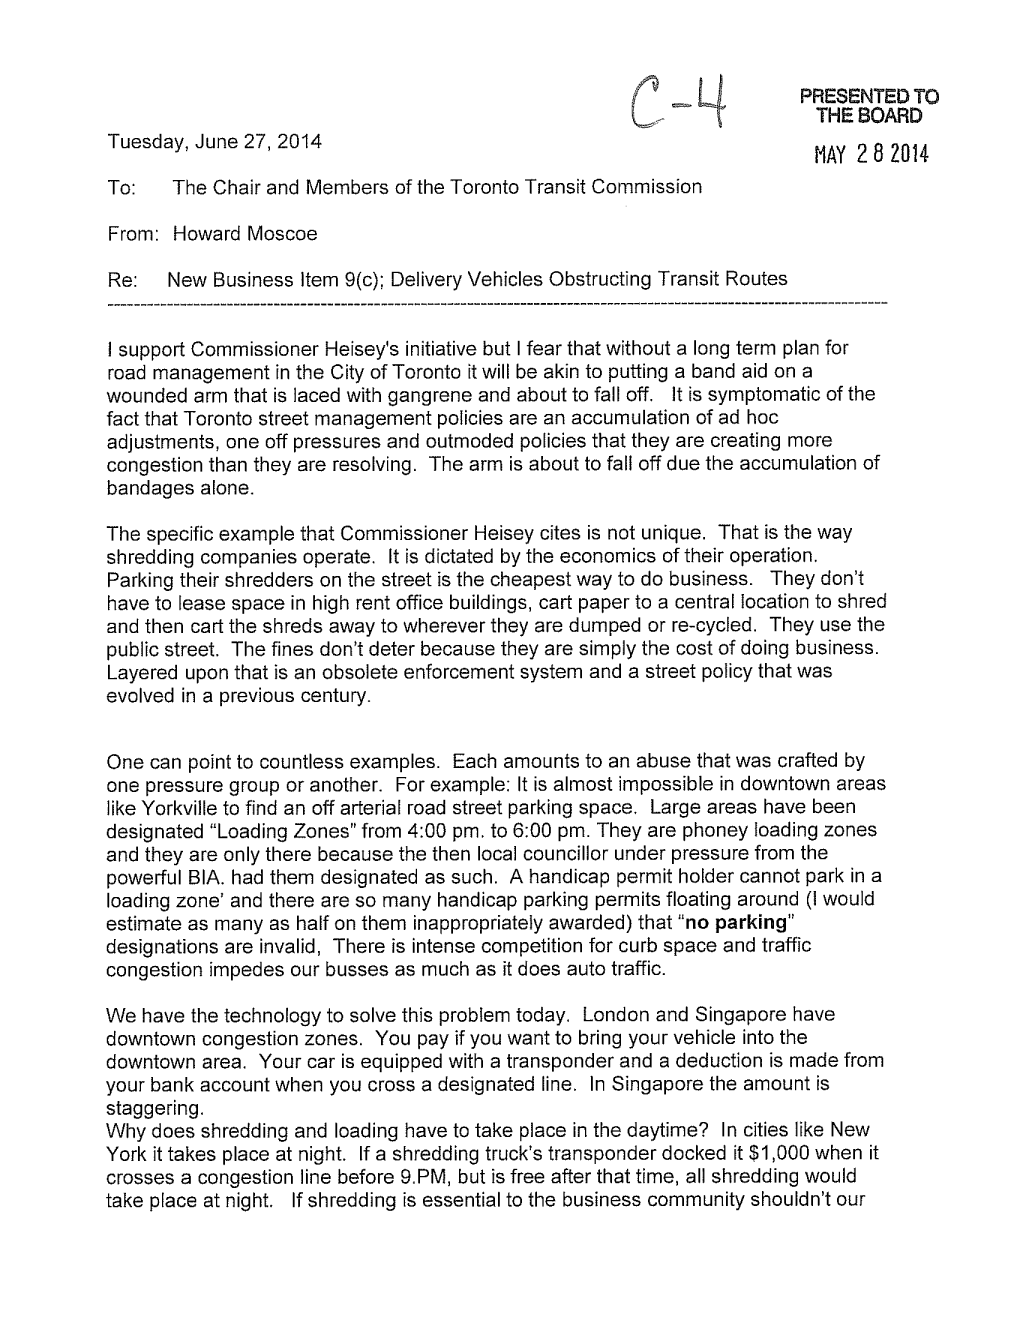 MAY 2 8 2014 To: the Chair and Members of the Toronto Transit Commission